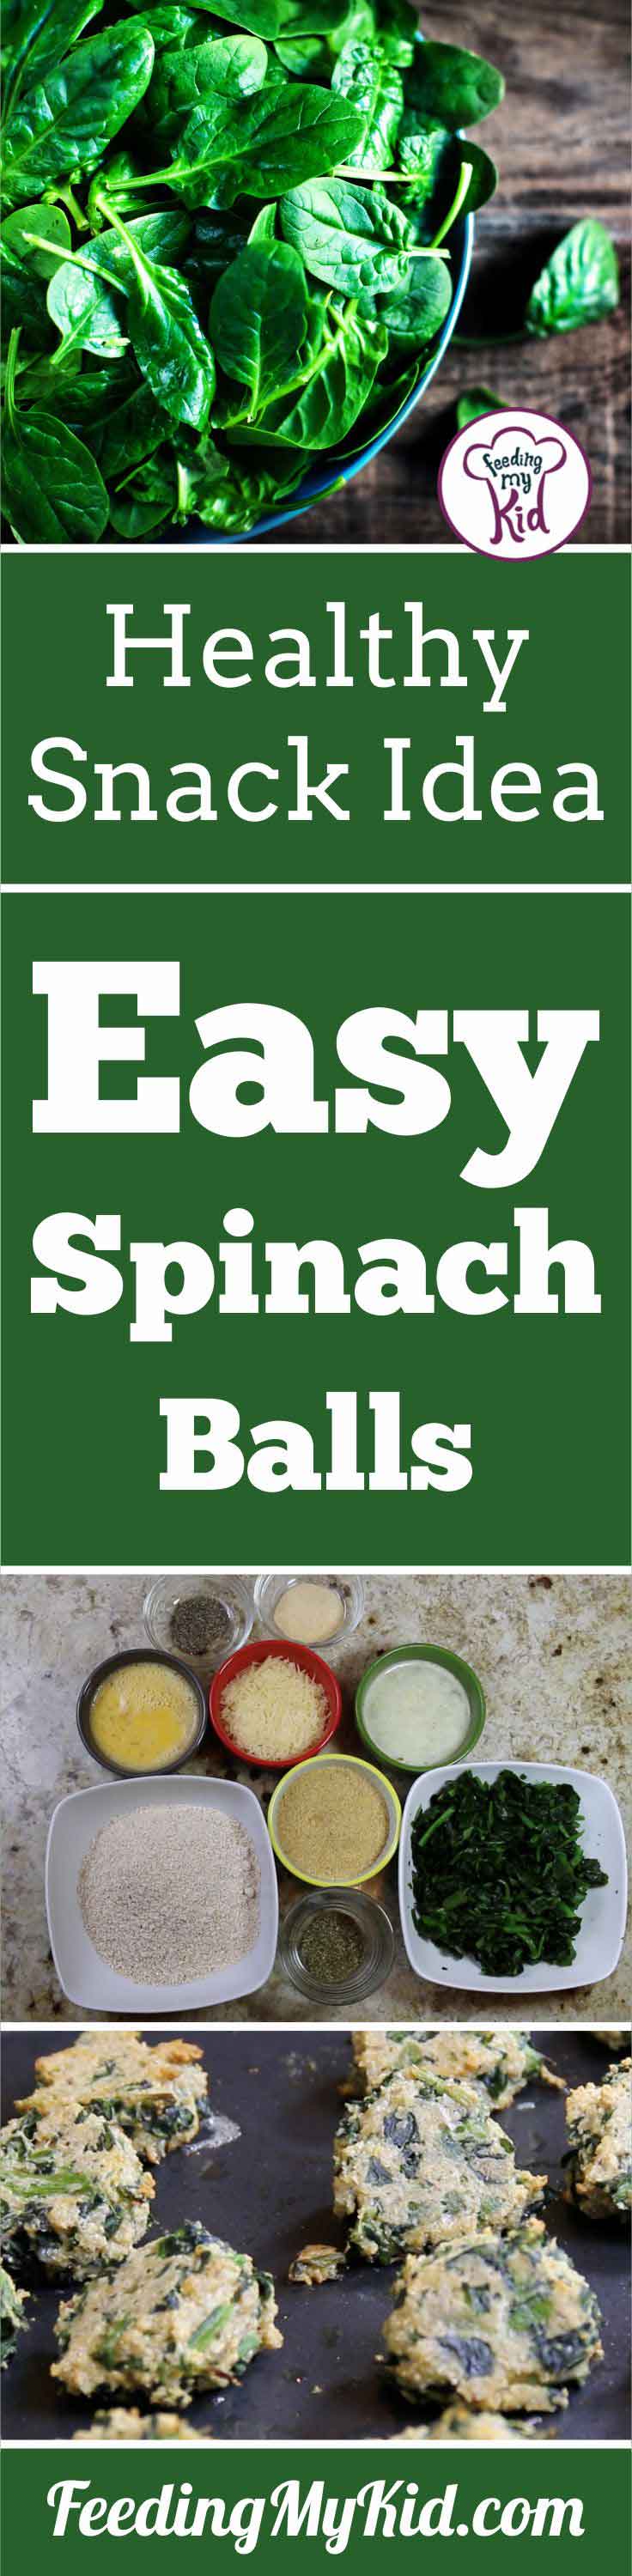 These spinach balls are easy to make and a great grab and go snack. They're the perfect healthy snack for toddlers and preschoolers.